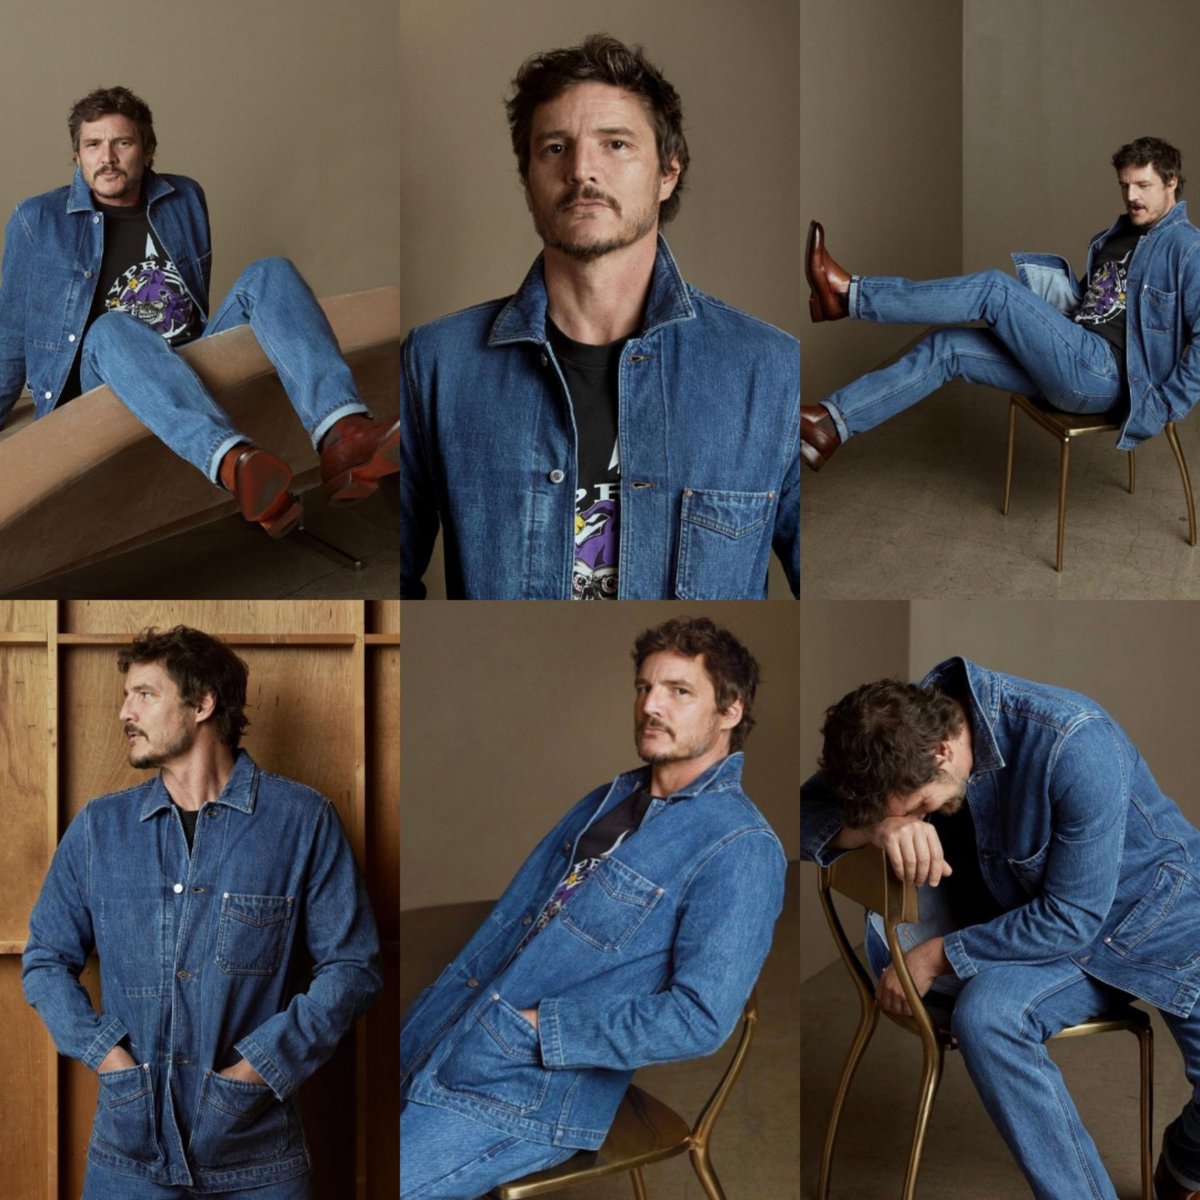 i'm never going to move on from pedro pascal in the double denim, sorry not sorry 👖✌️